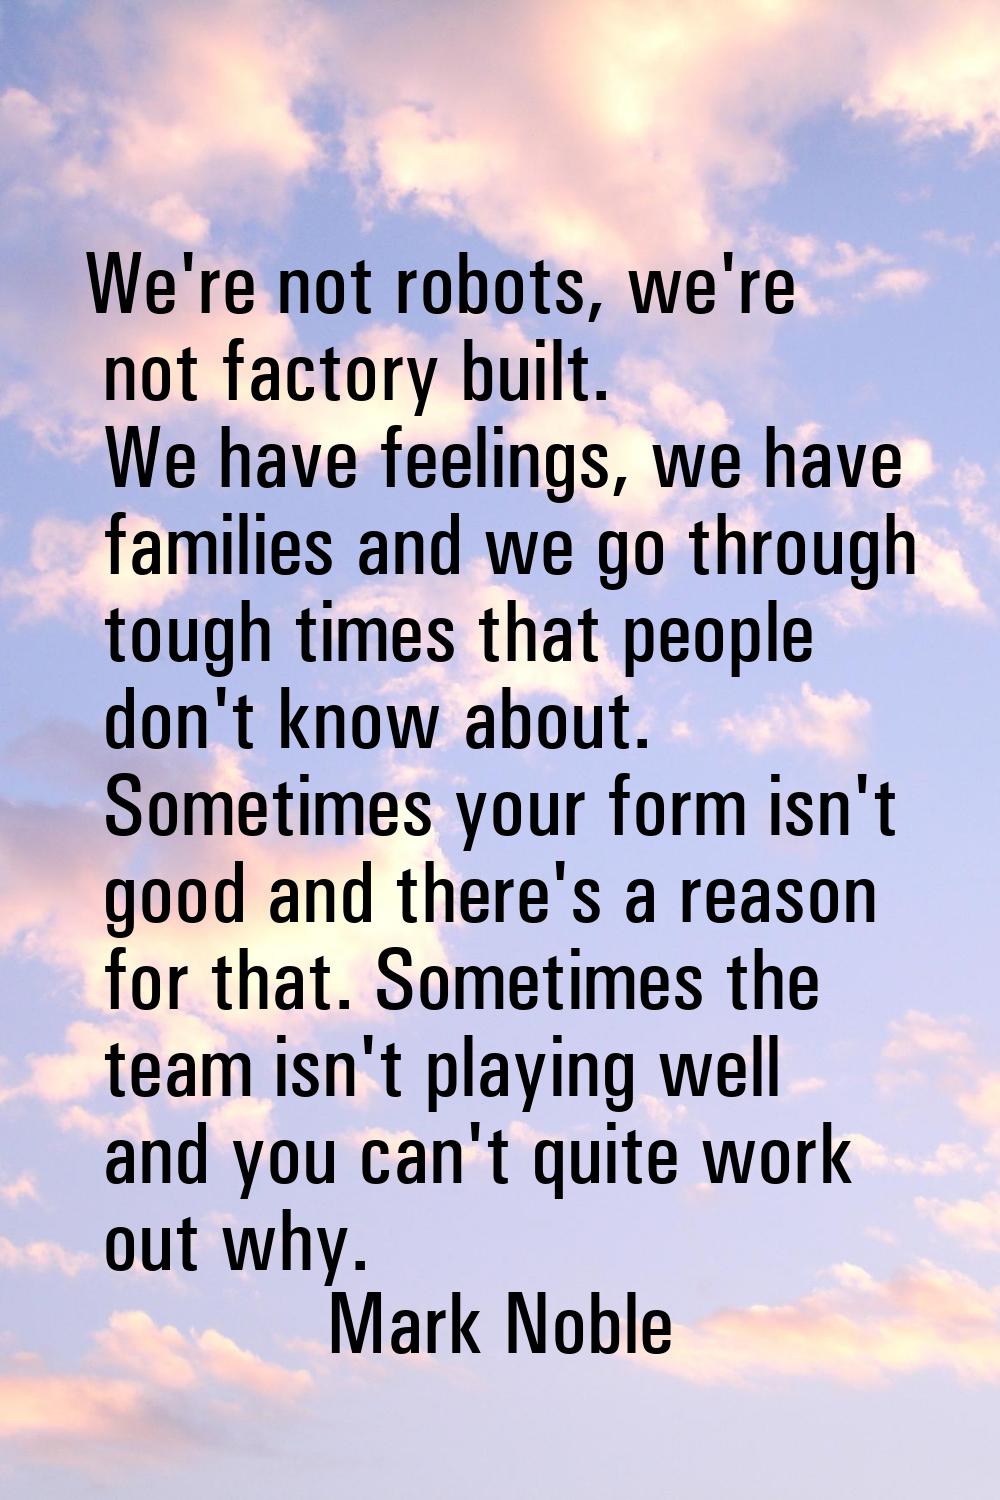 We're not robots, we're not factory built. We have feelings, we have families and we go through tou